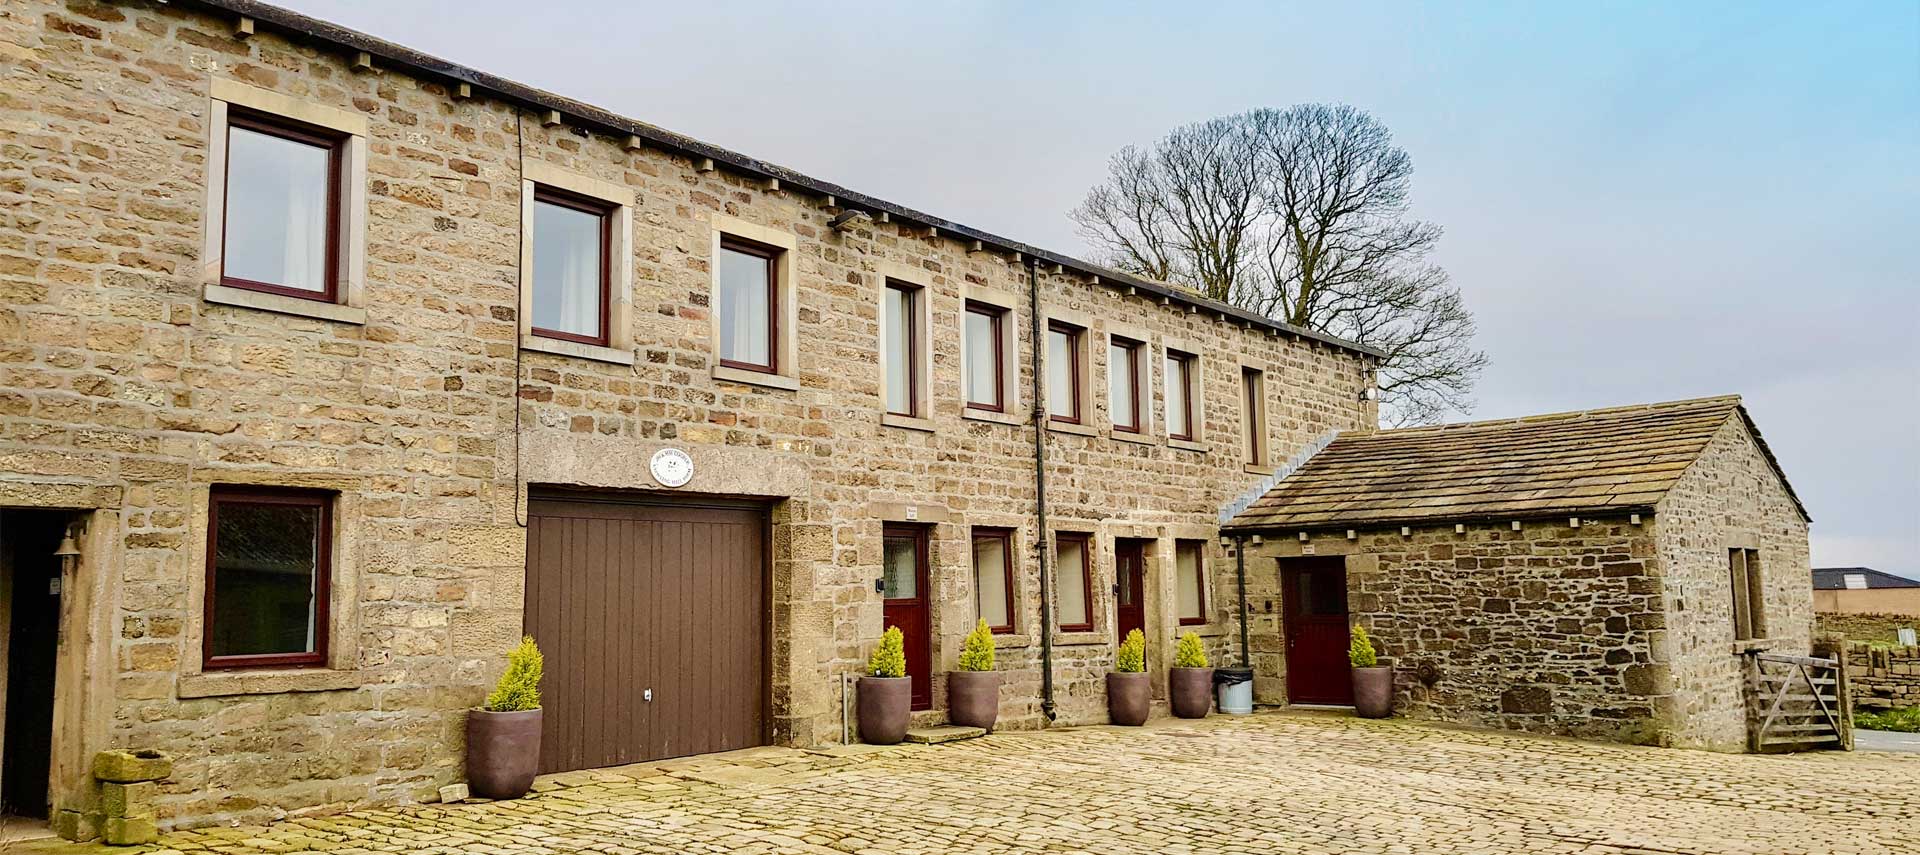 Cowling Hill Cottages Yorkshire Holidays